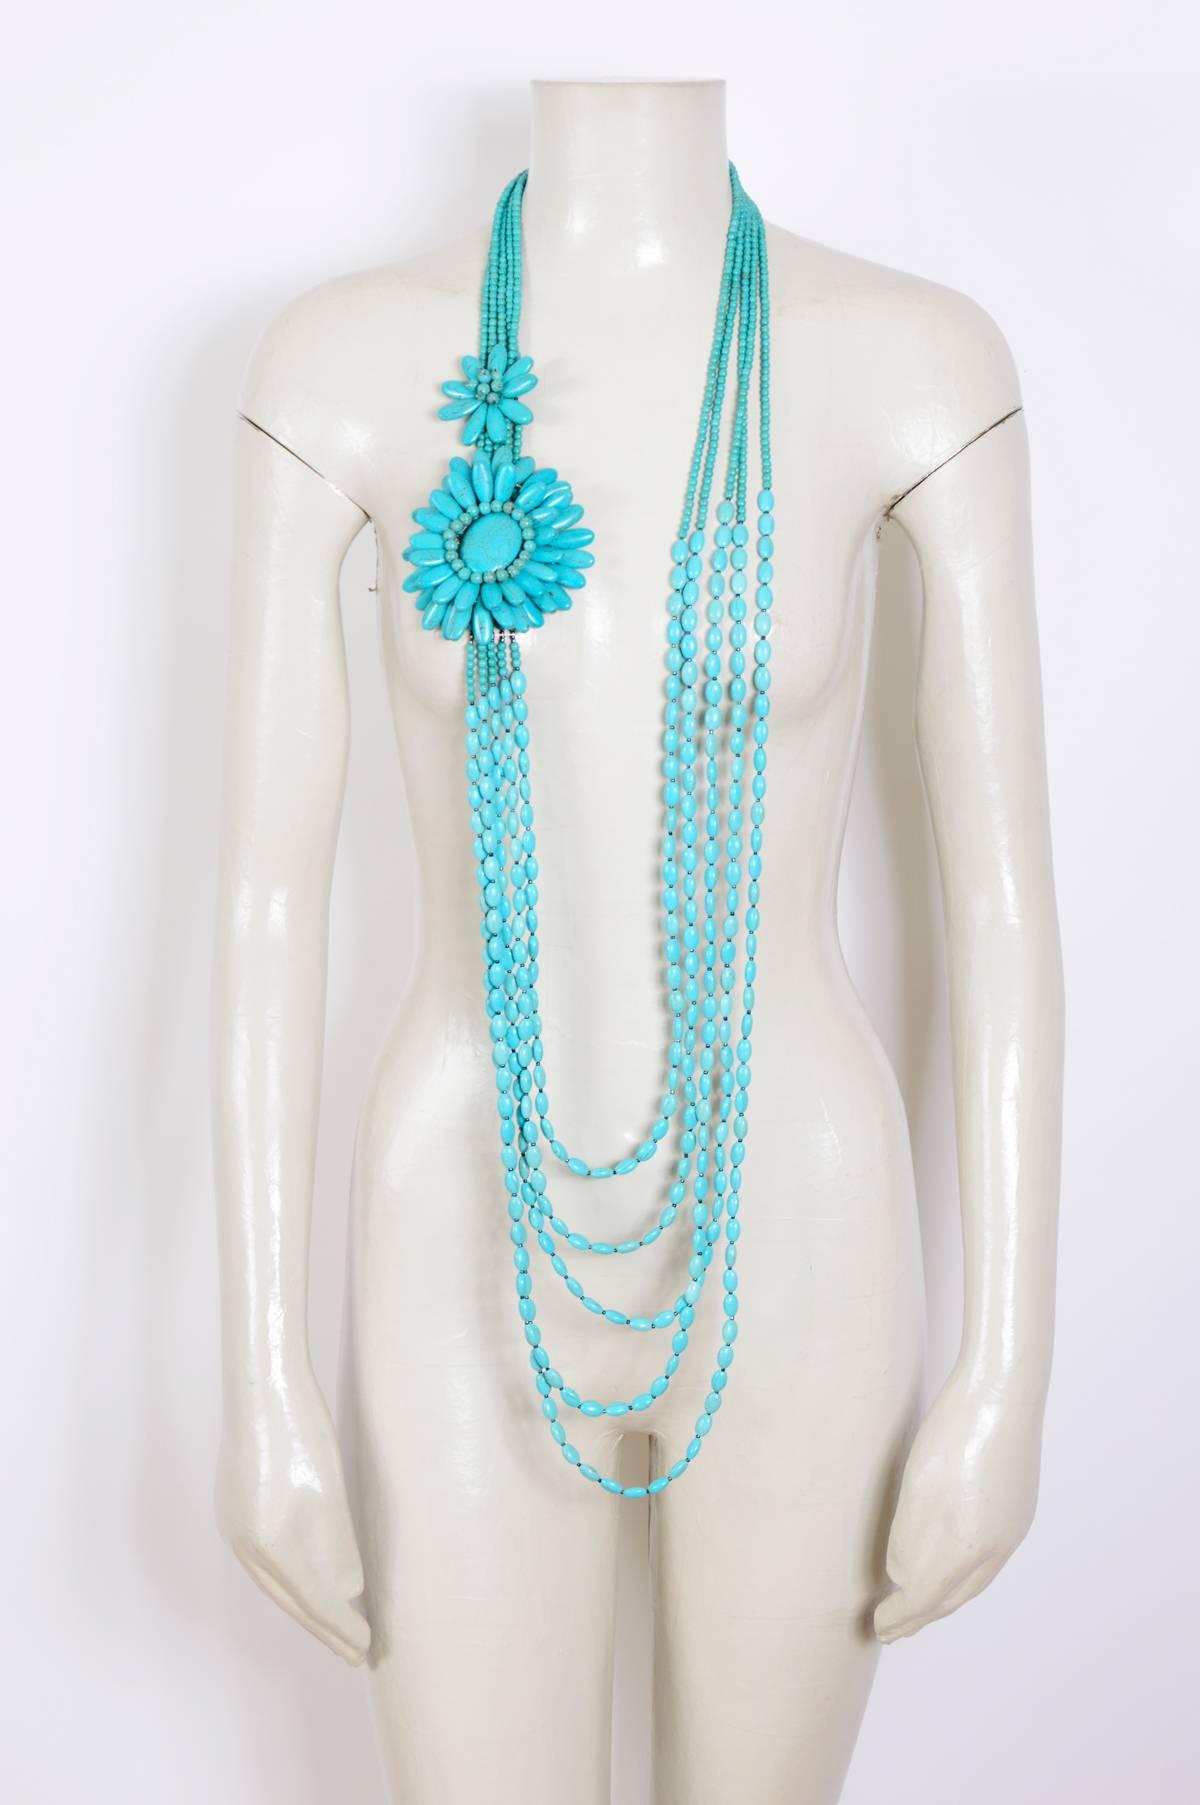 Beautiful opera length turquoise beaded necklace.
Total length 48inch/122cm - Drop 30inch/76cm
